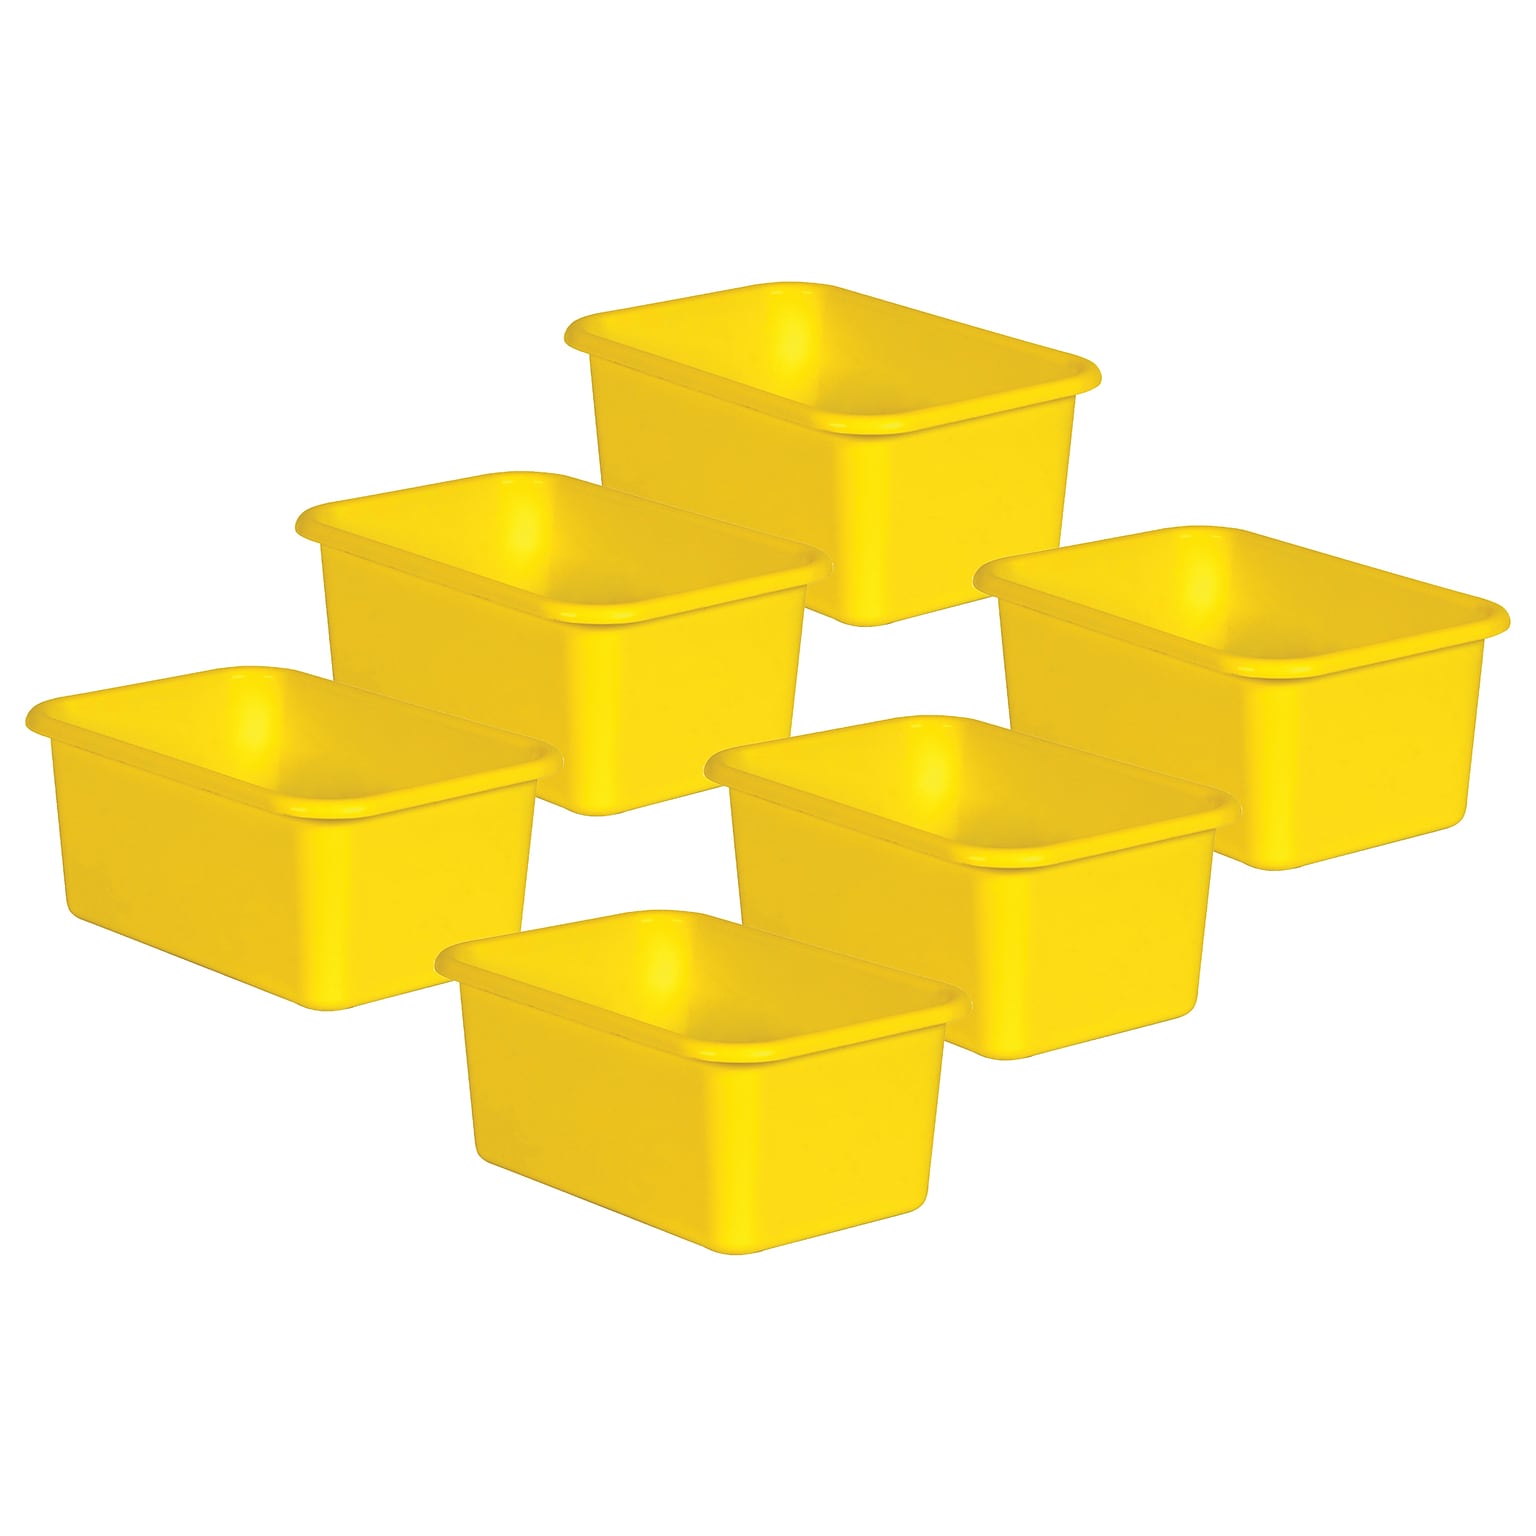 Teacher Created Resources® Plastic Storage Bin, Small, 7.75 x 11.38 x 5 , Yellow, Pack of 6 (TCR20392-6)